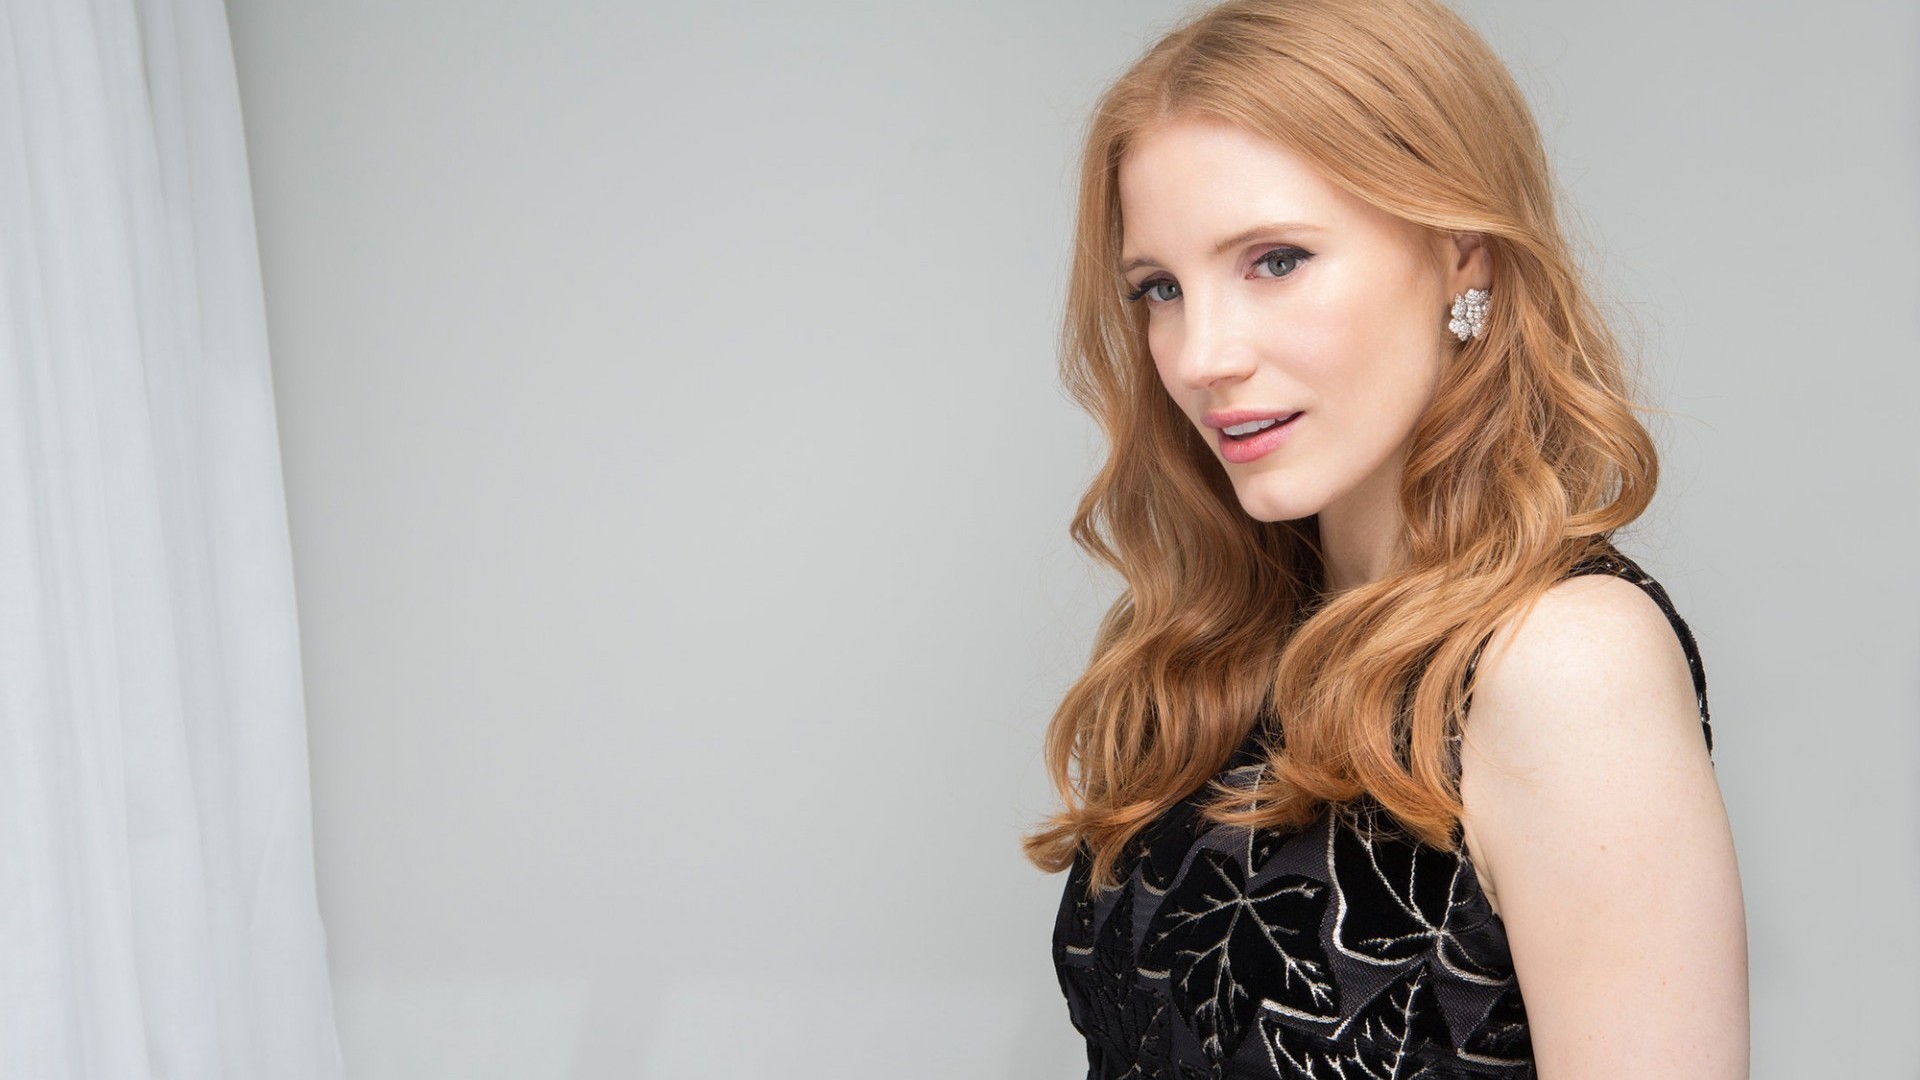 Jessica Chastain Wallpapers Images Photos Pictures Backgrounds Images, Photos, Reviews